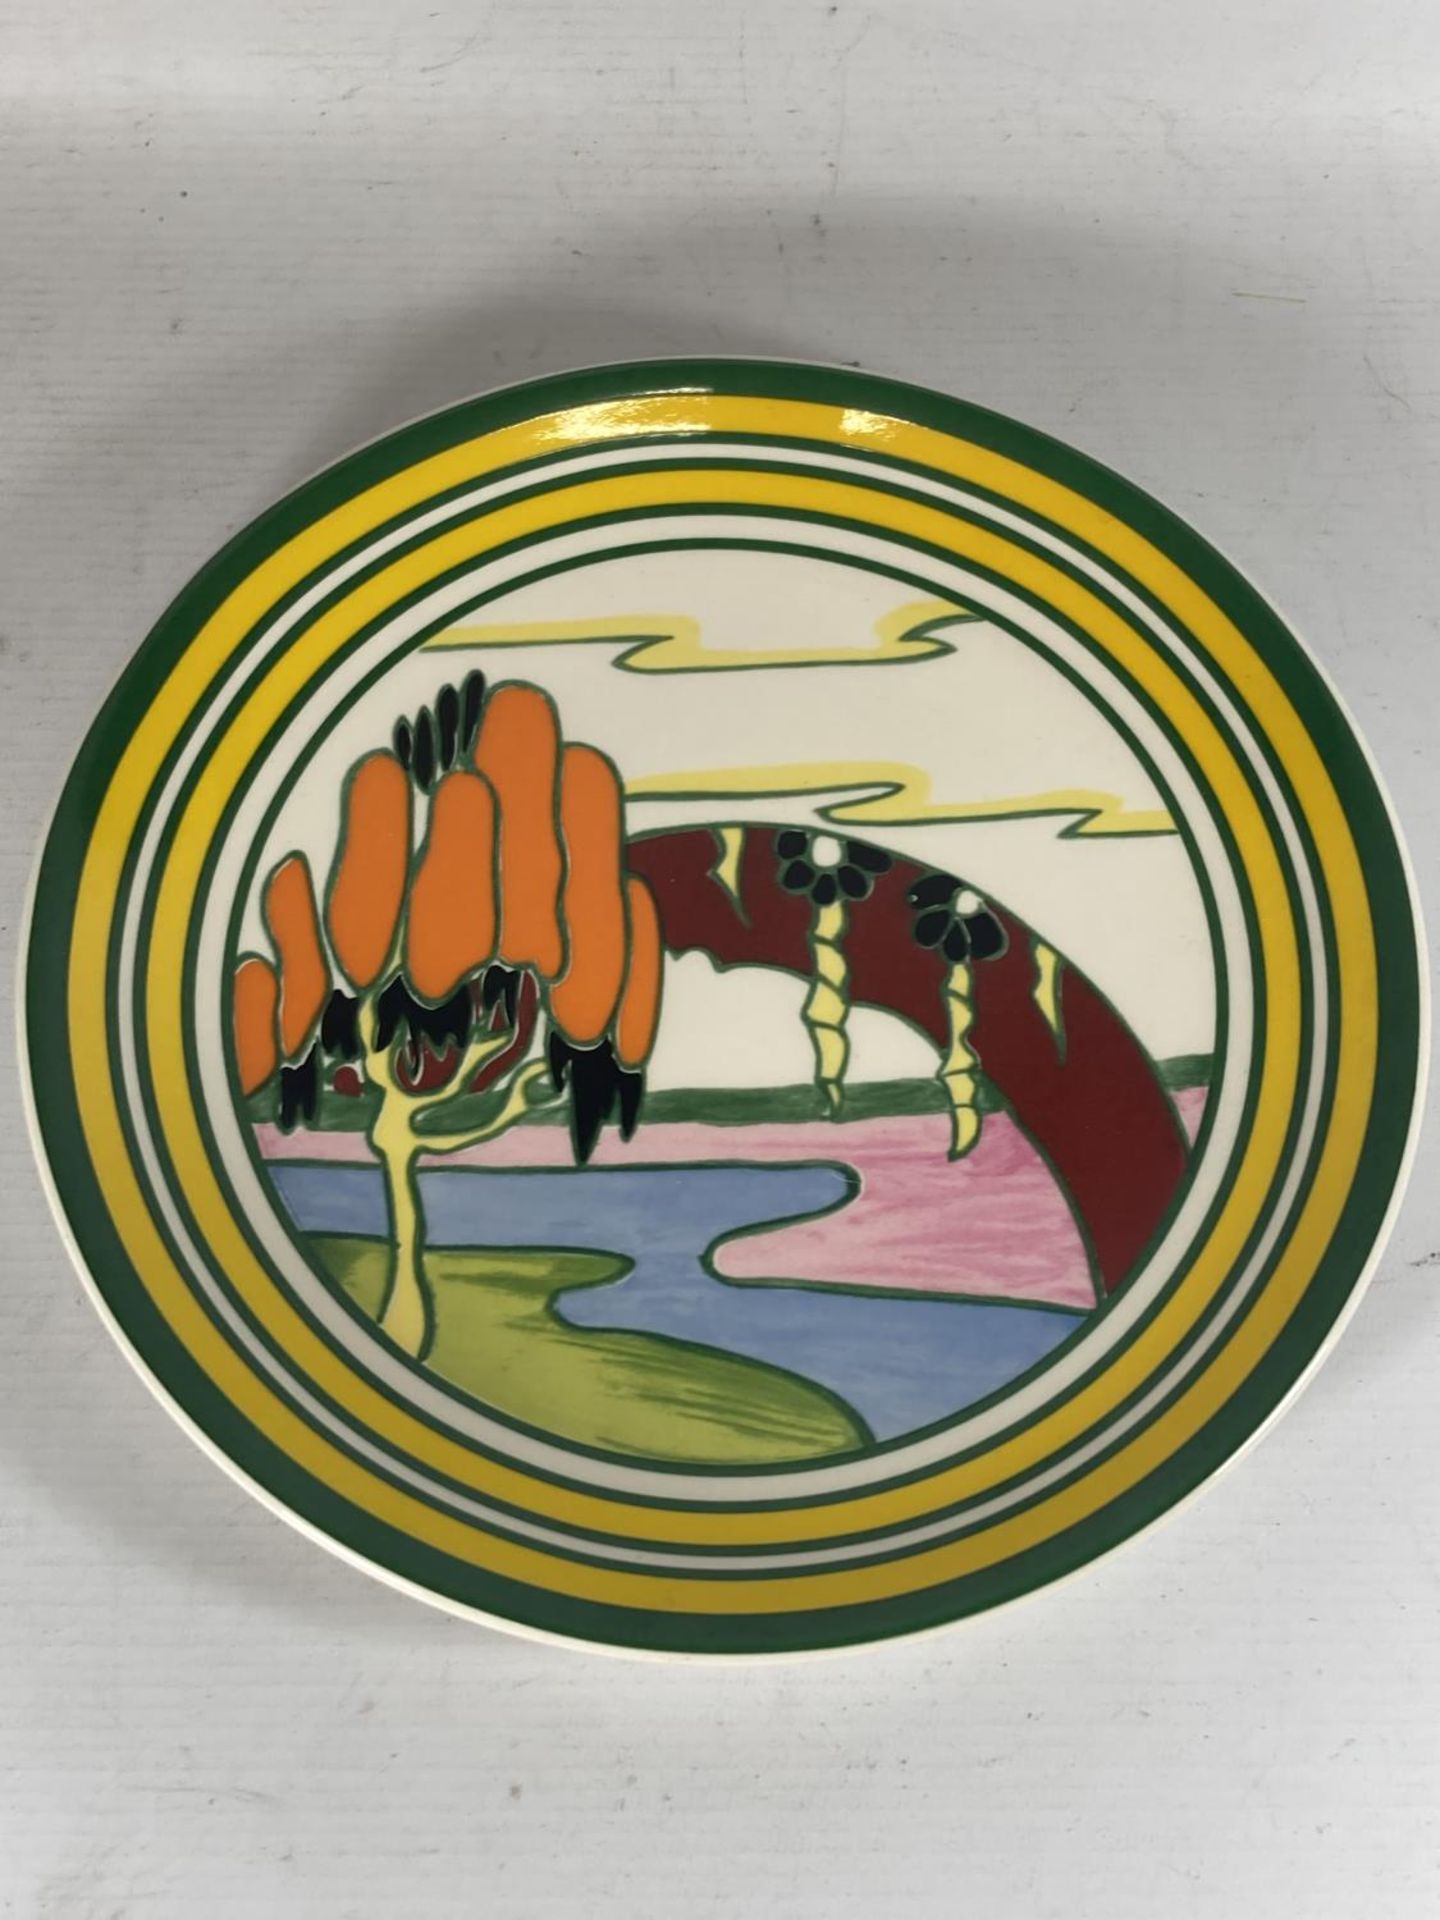 A WEDGWOOD CLARICE CLIFF LIMITED EDITION 10" SOLITUDE PATTERN PLATE